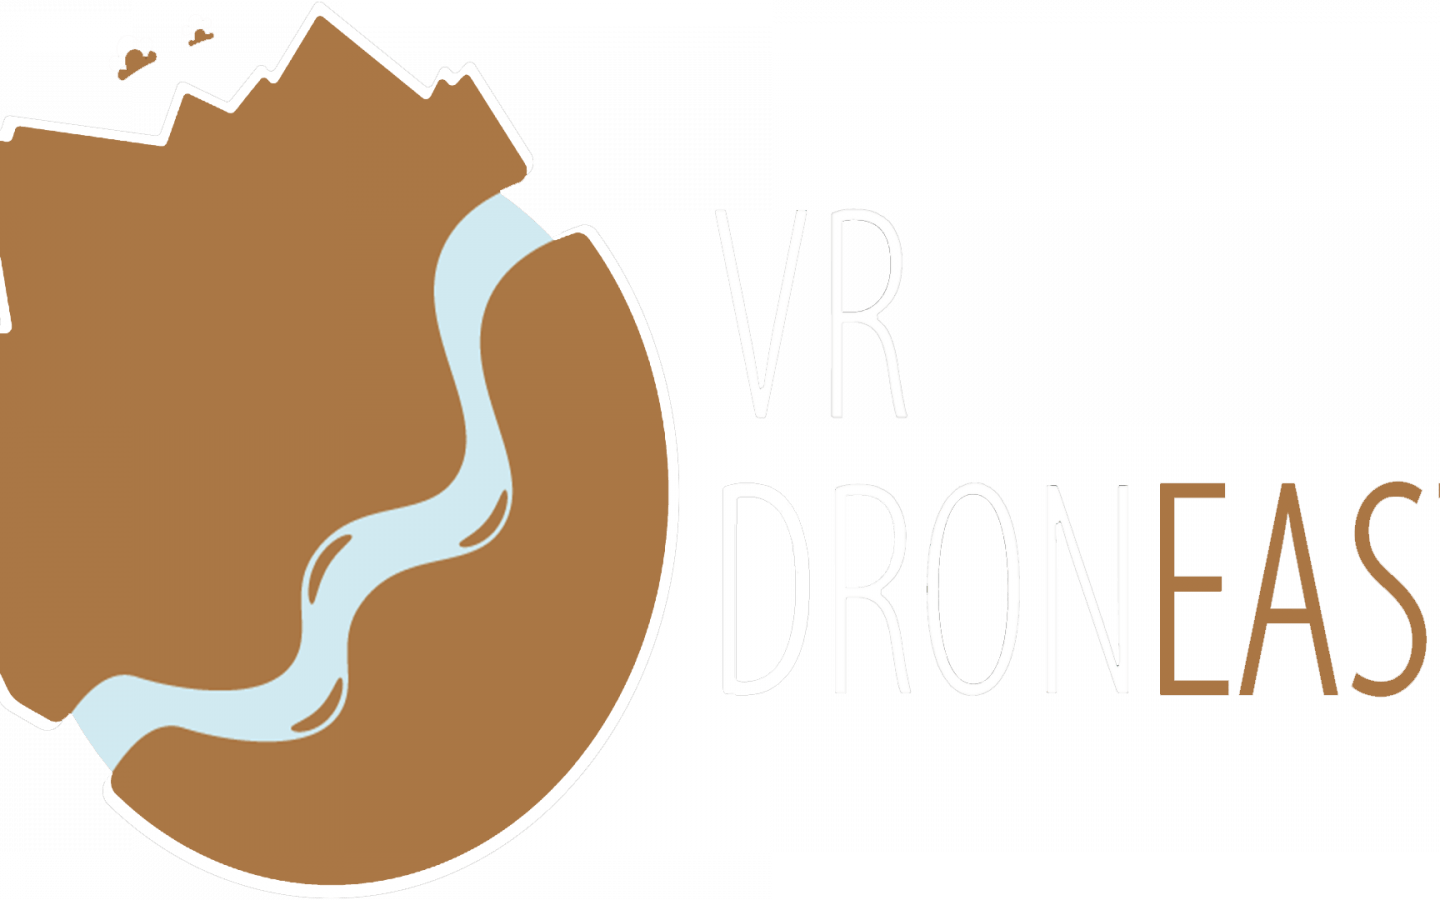 VR DronEast